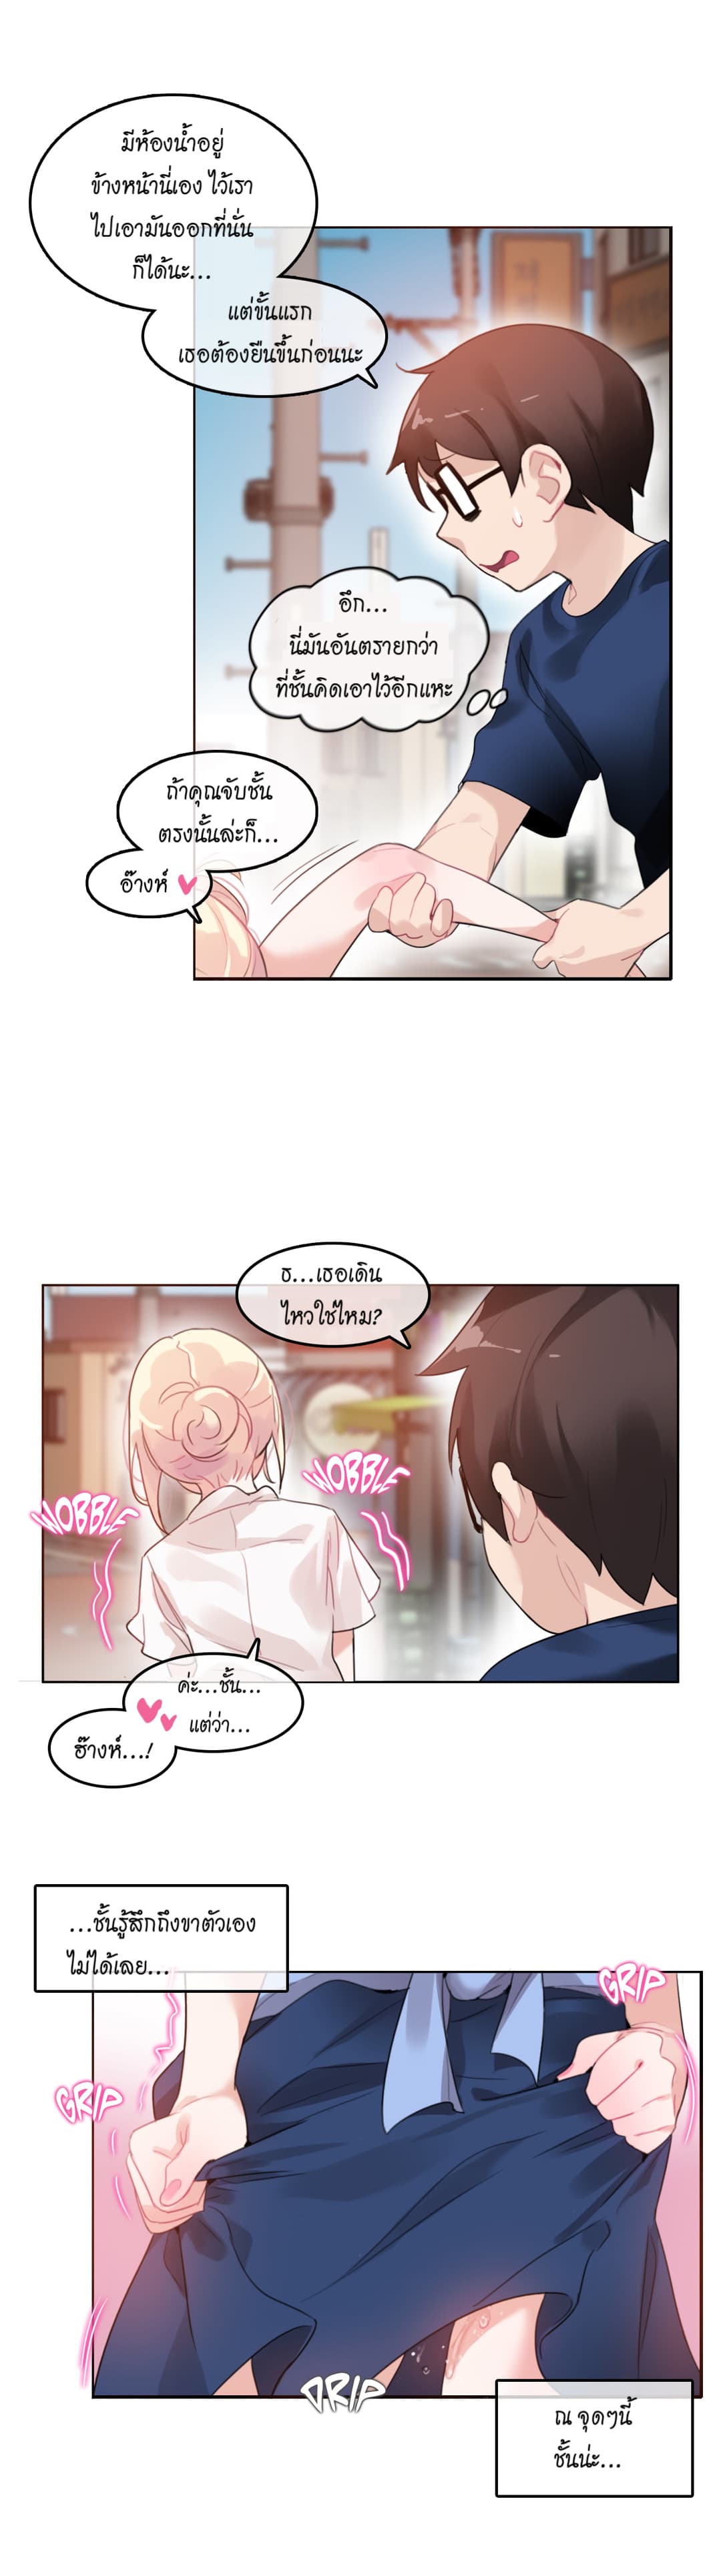 A Pervert’s Daily Life 35 (12)